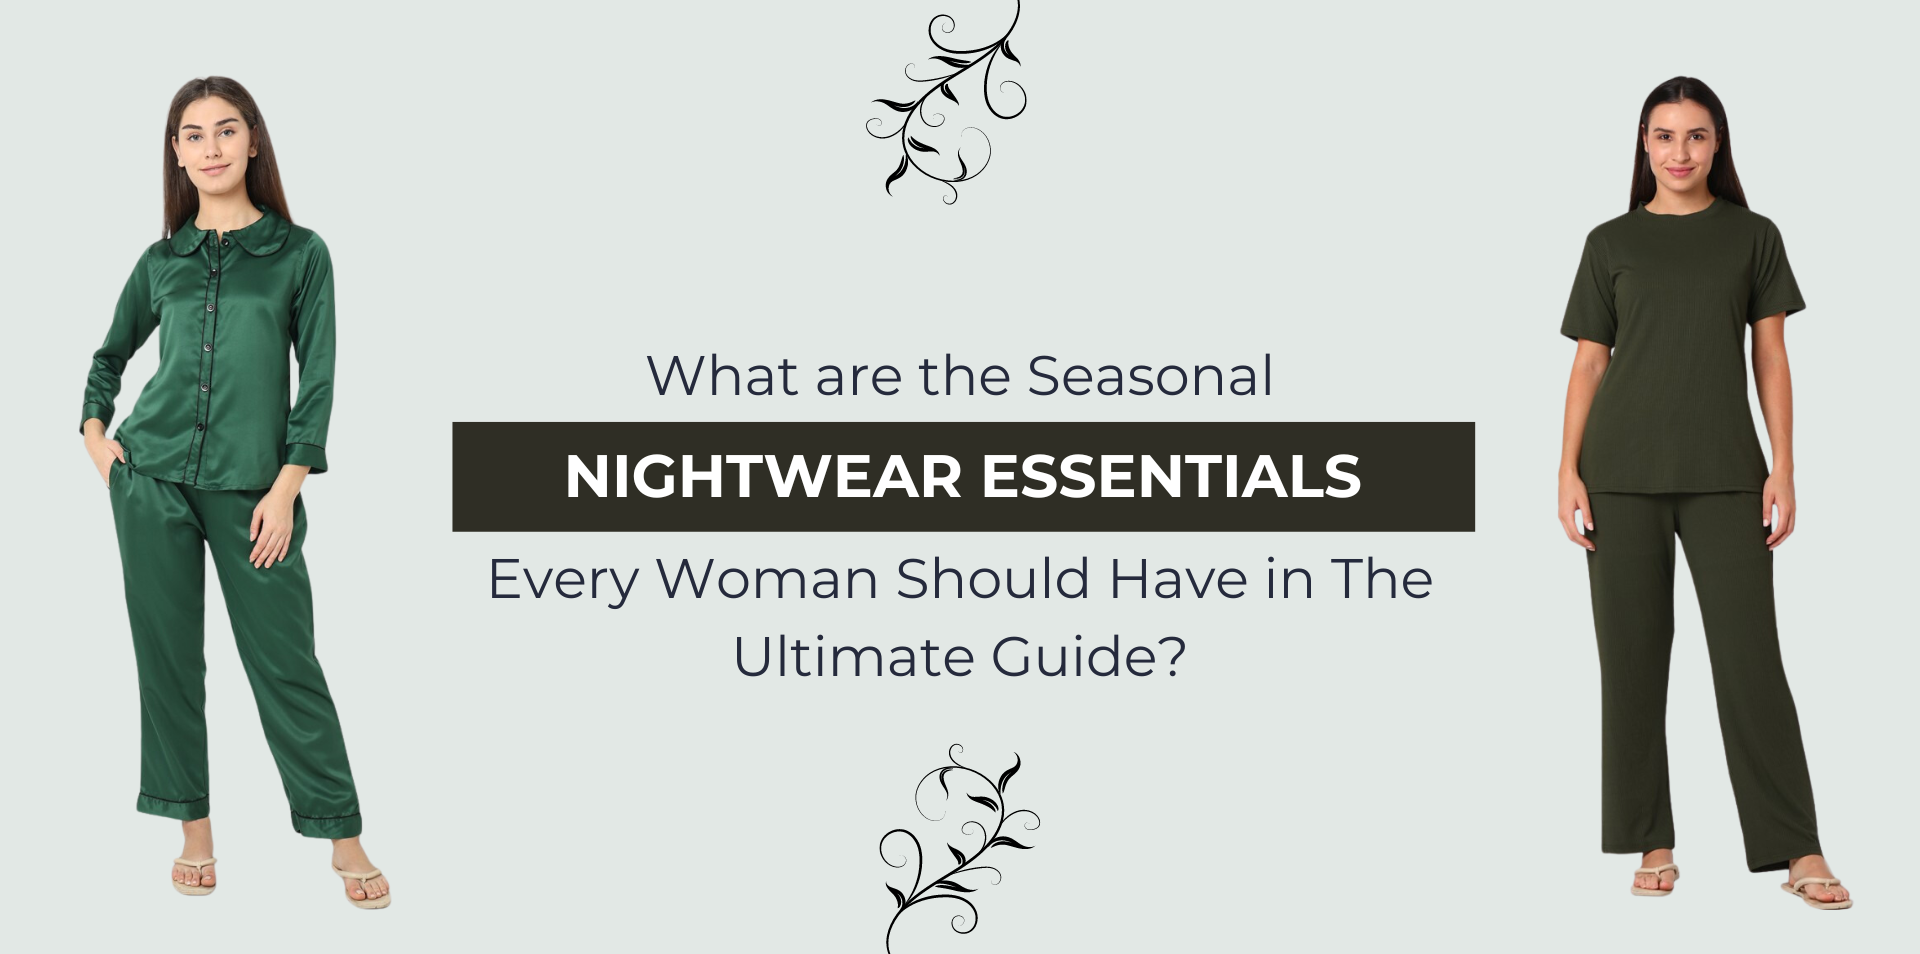 What are the Seasonal Nightwear Essentials Every Woman Should Have in The Ultimate Guide?